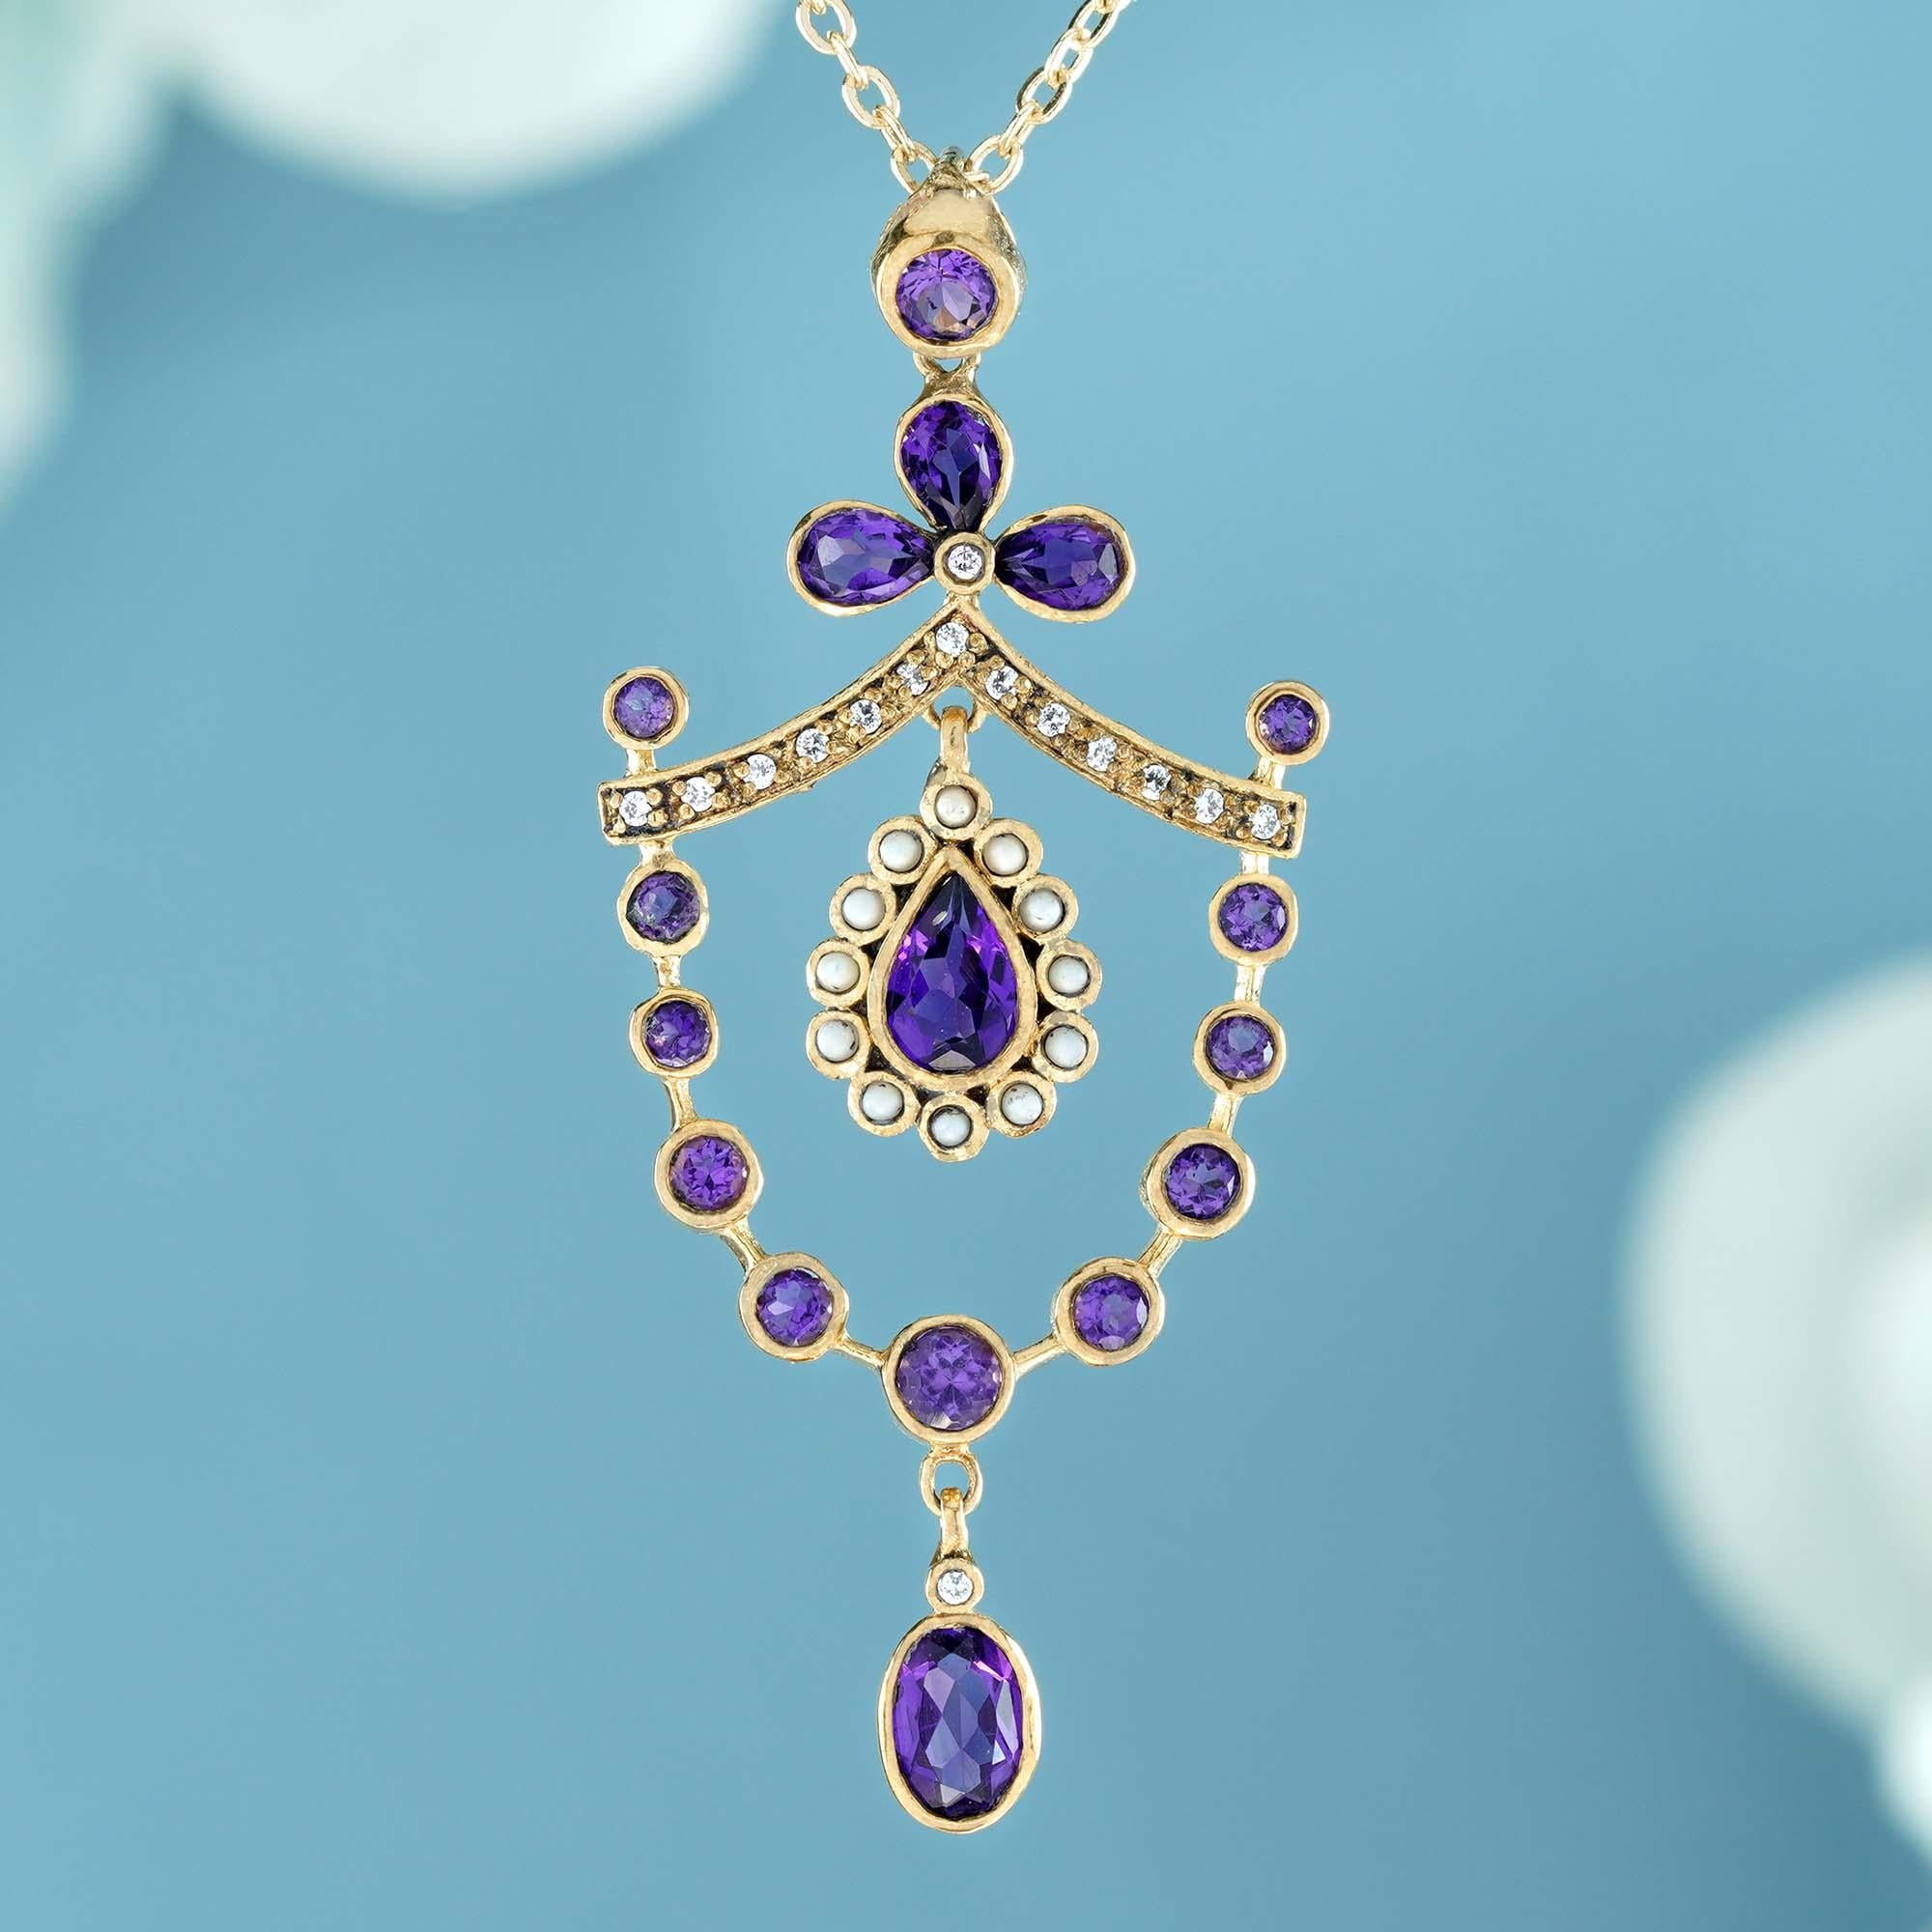 The round and oval cascade of purple amethysts alike glittering raindrops frozen in mid-air, allowing the purple color and faceted large pear-shaped amethyst forms the center of the piece.  This gemstone is faceted, catching the light with each